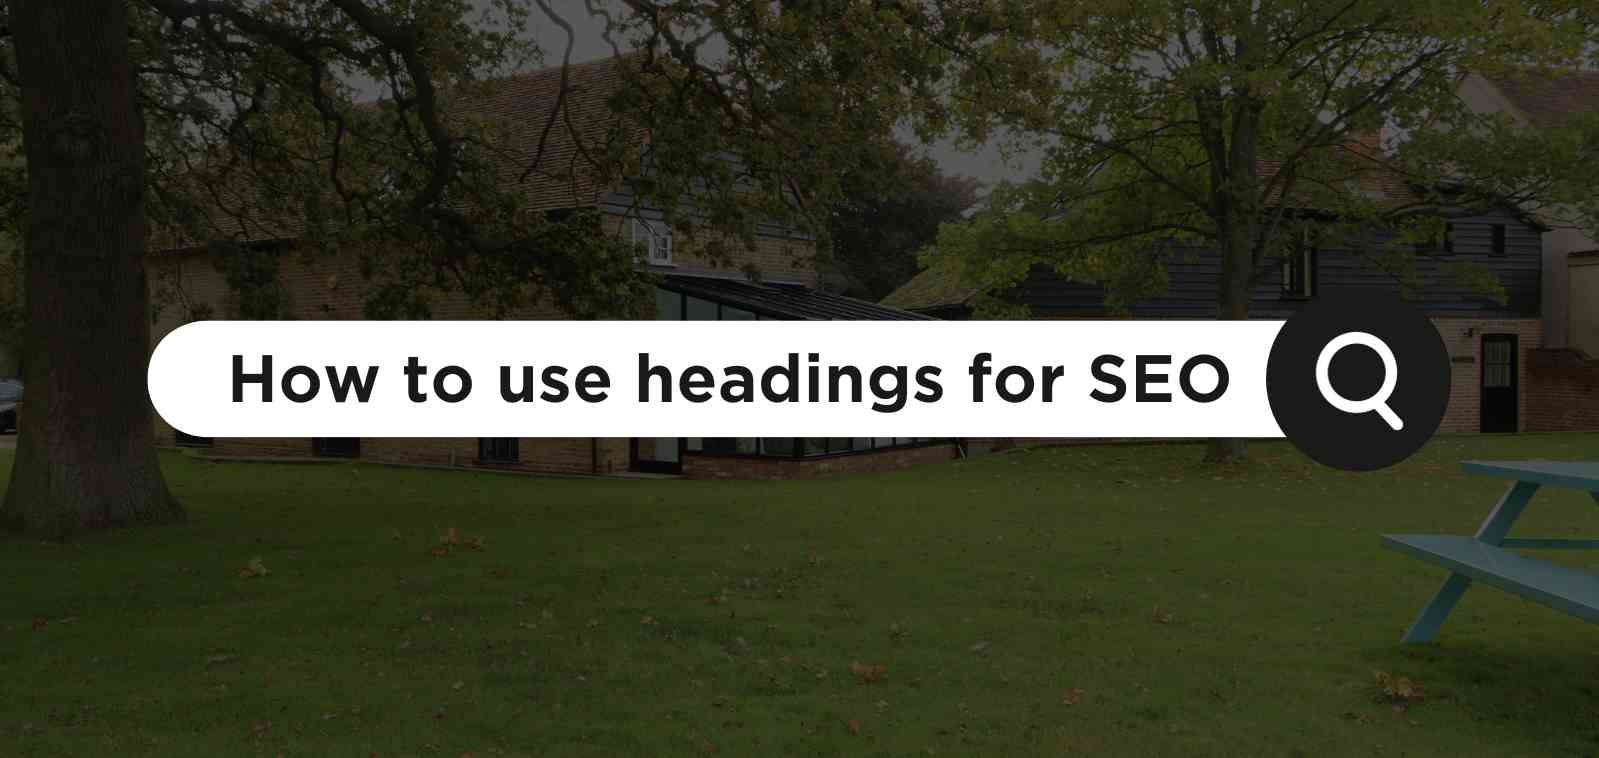 How to Use Headings for SEO